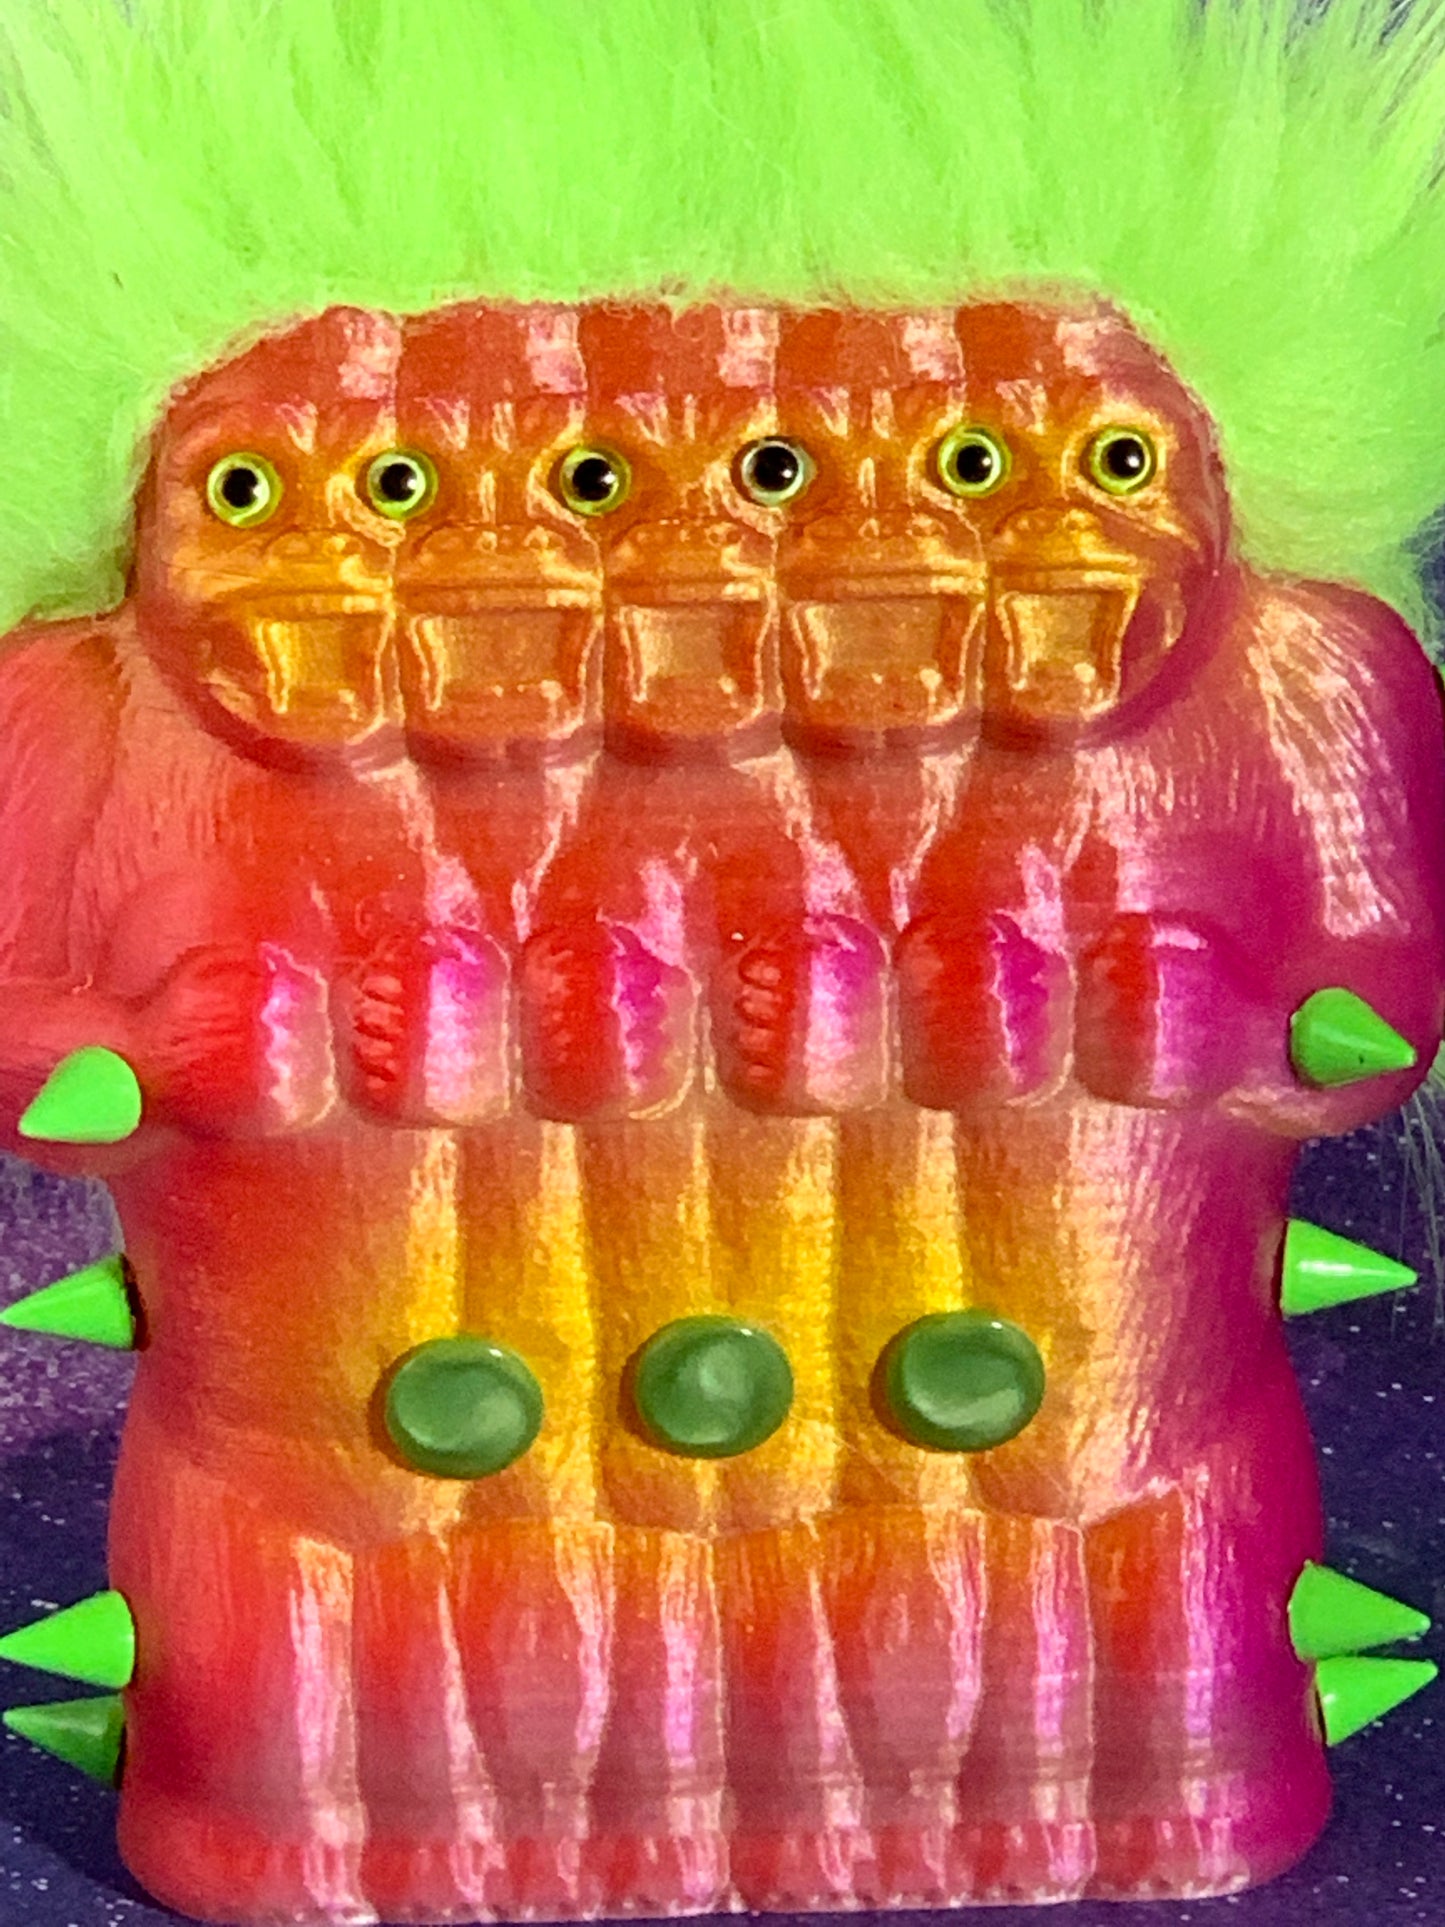 5 Headed Freak Ape: Pink and Red